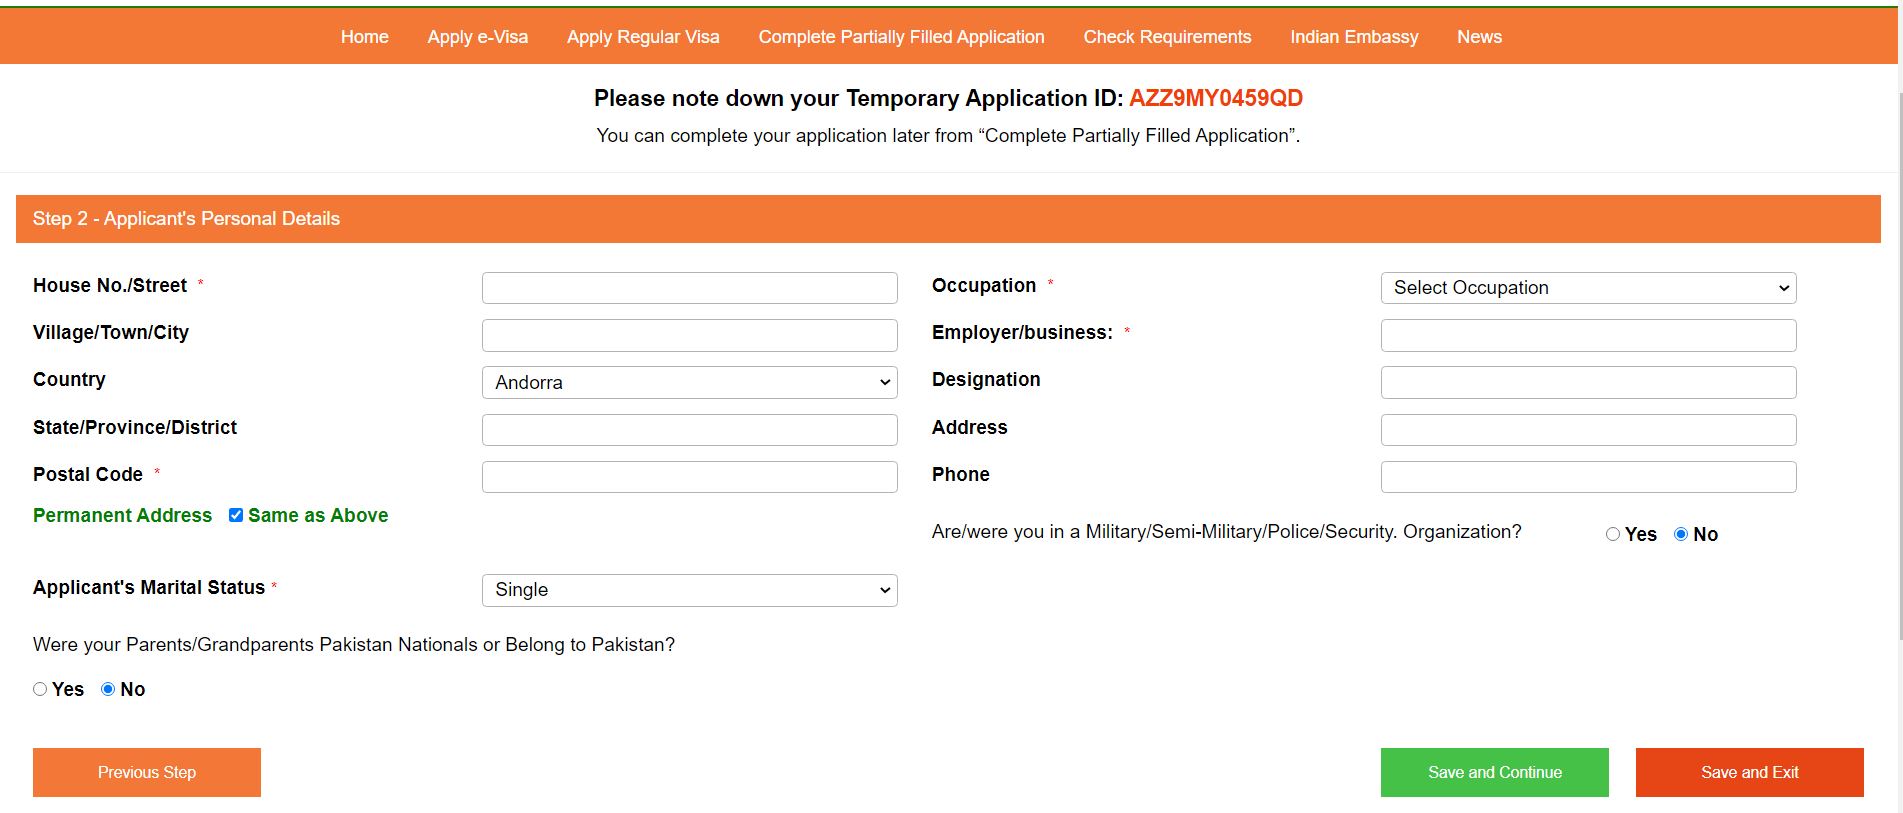 Indian visa form, provide address and contact info